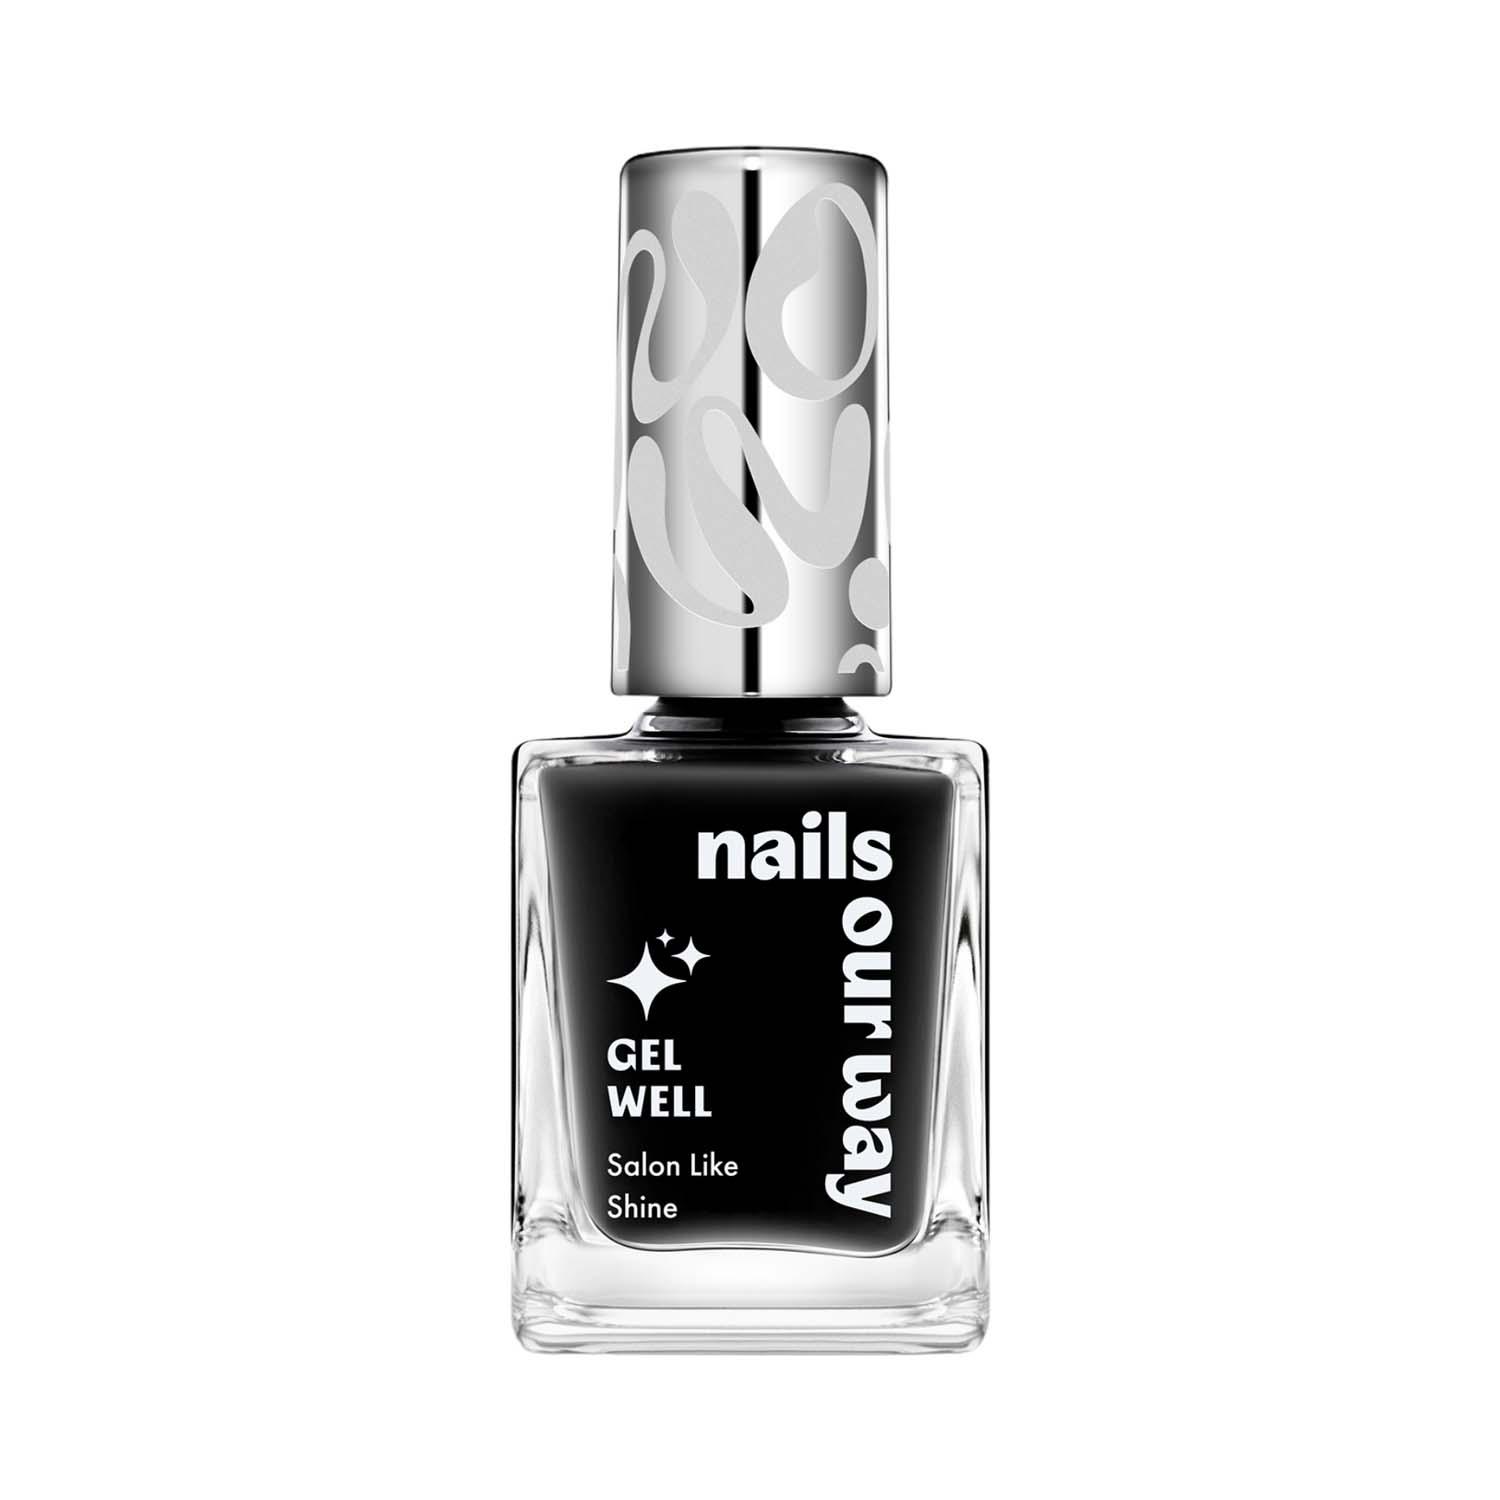 Nails Our Way | Nails Our Way Gel Well Nail Enamel - 706 Sleek (10 ml)